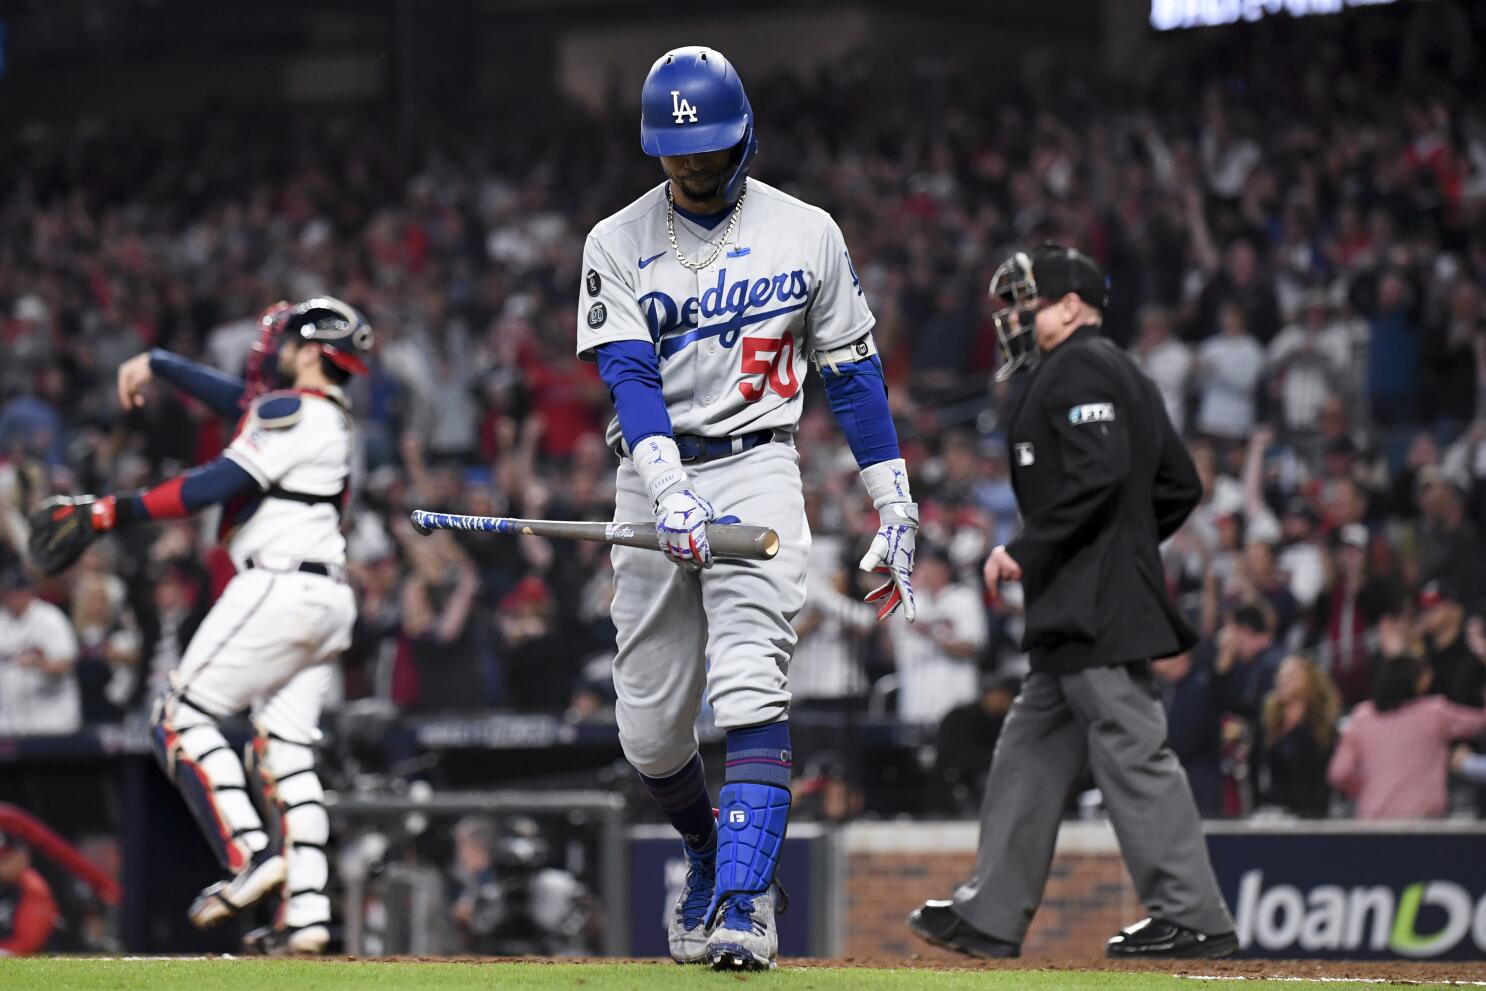 Fourth inning of NLCS Game 2 full of questionable managerial